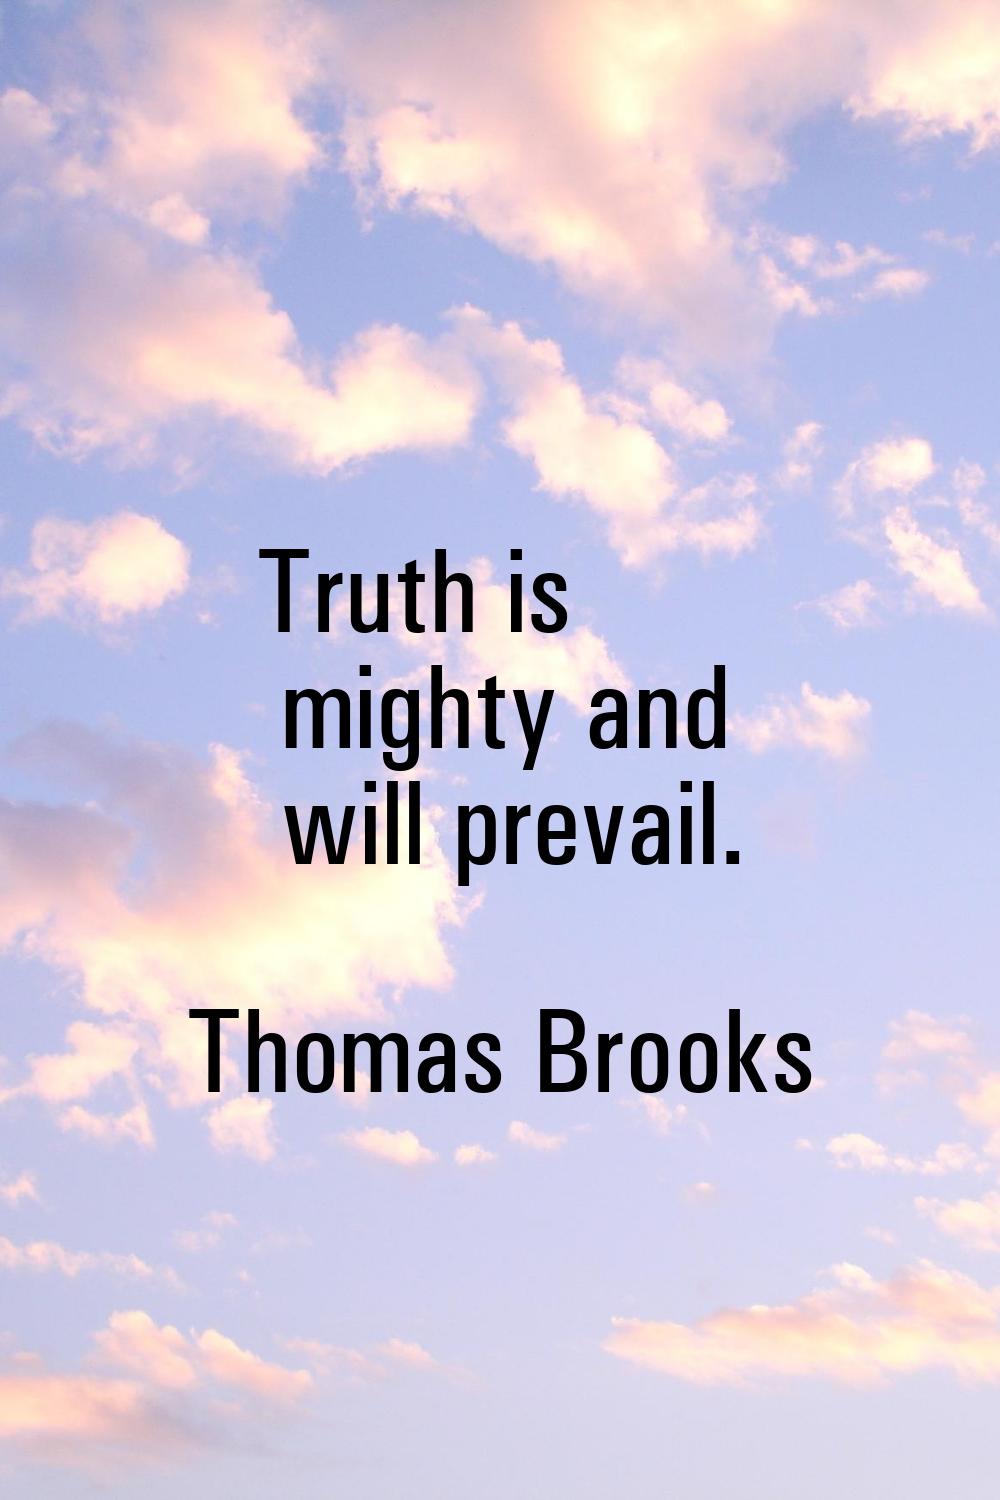 Truth is mighty and will prevail.